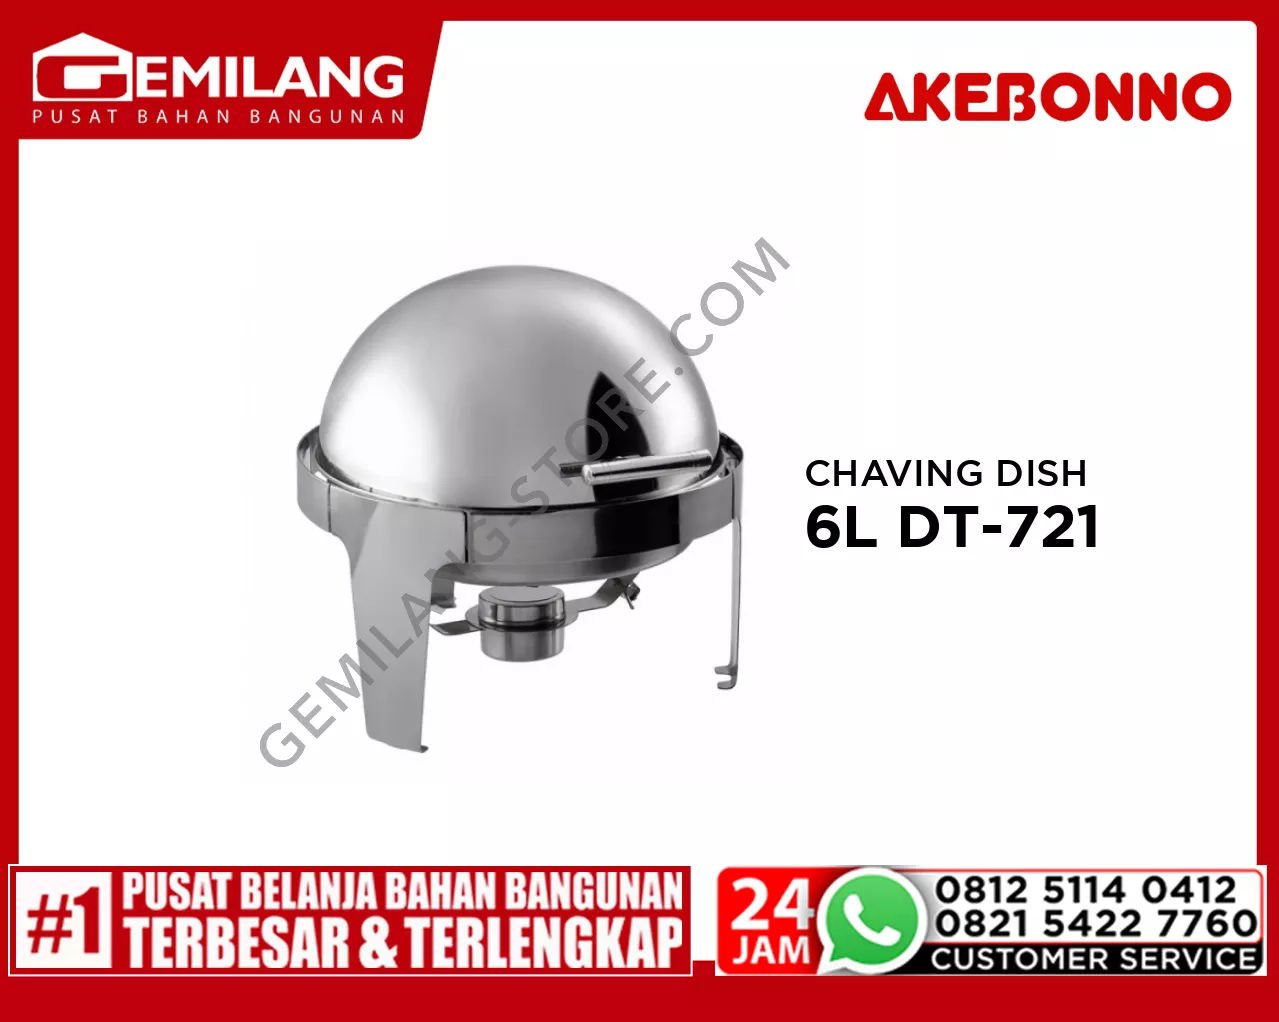 AKEBONNO ROUND ROLL CHAFING DISH 6ltr DT-721